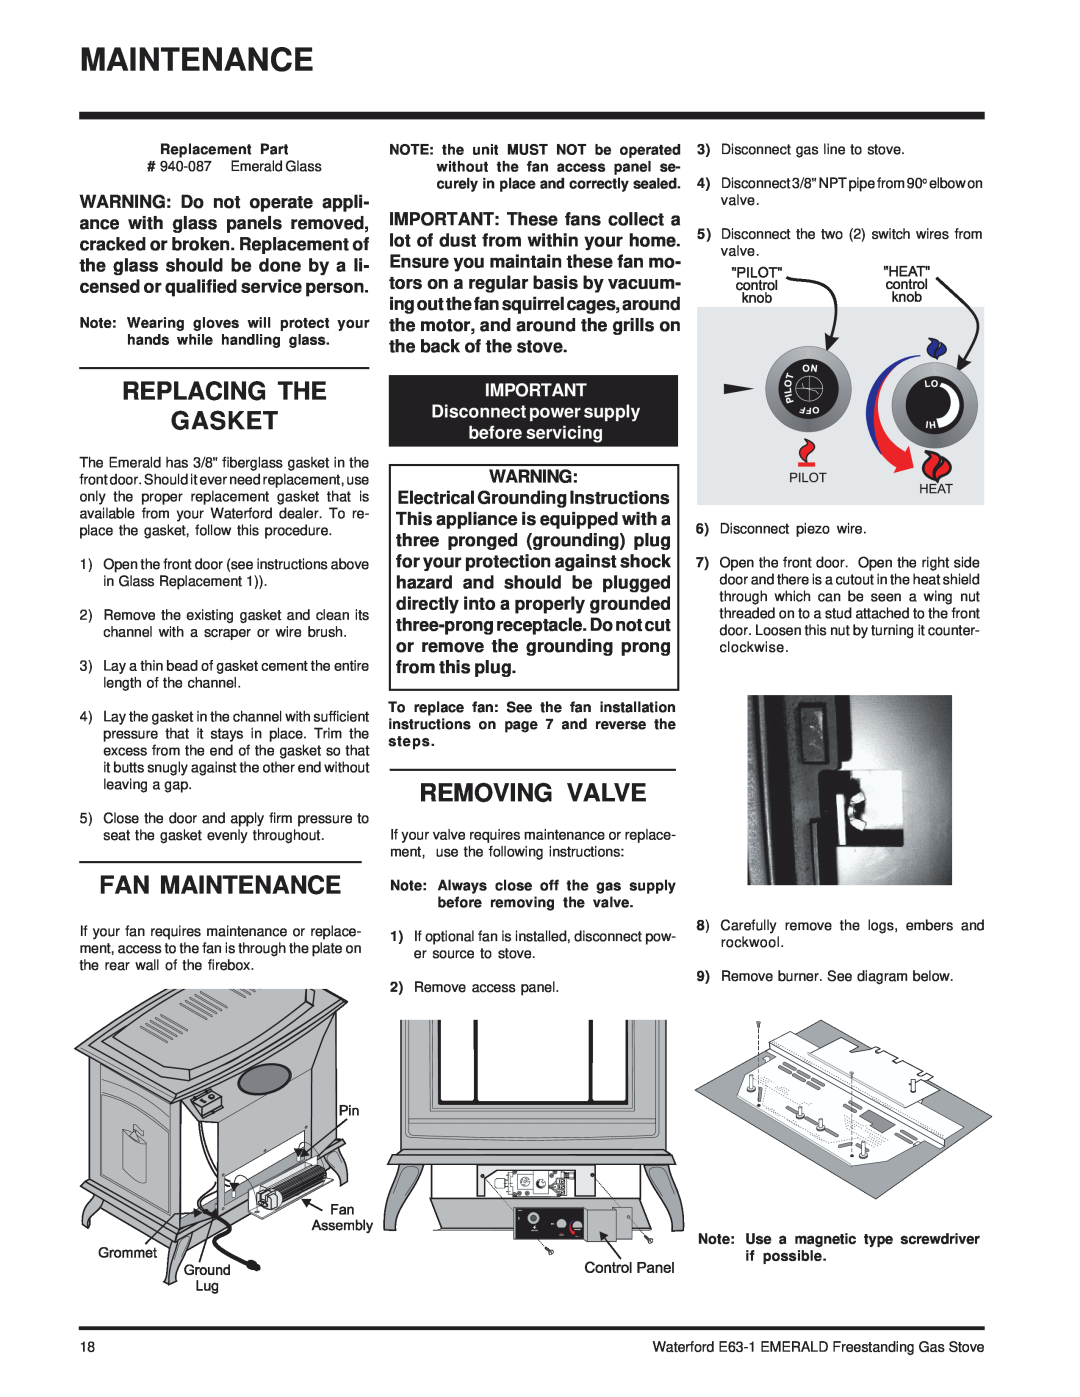 Waterford Appliances E63-NG1 Replacing The Gasket, Fan Maintenance, Removing Valve, WARNING Do not operate appli 